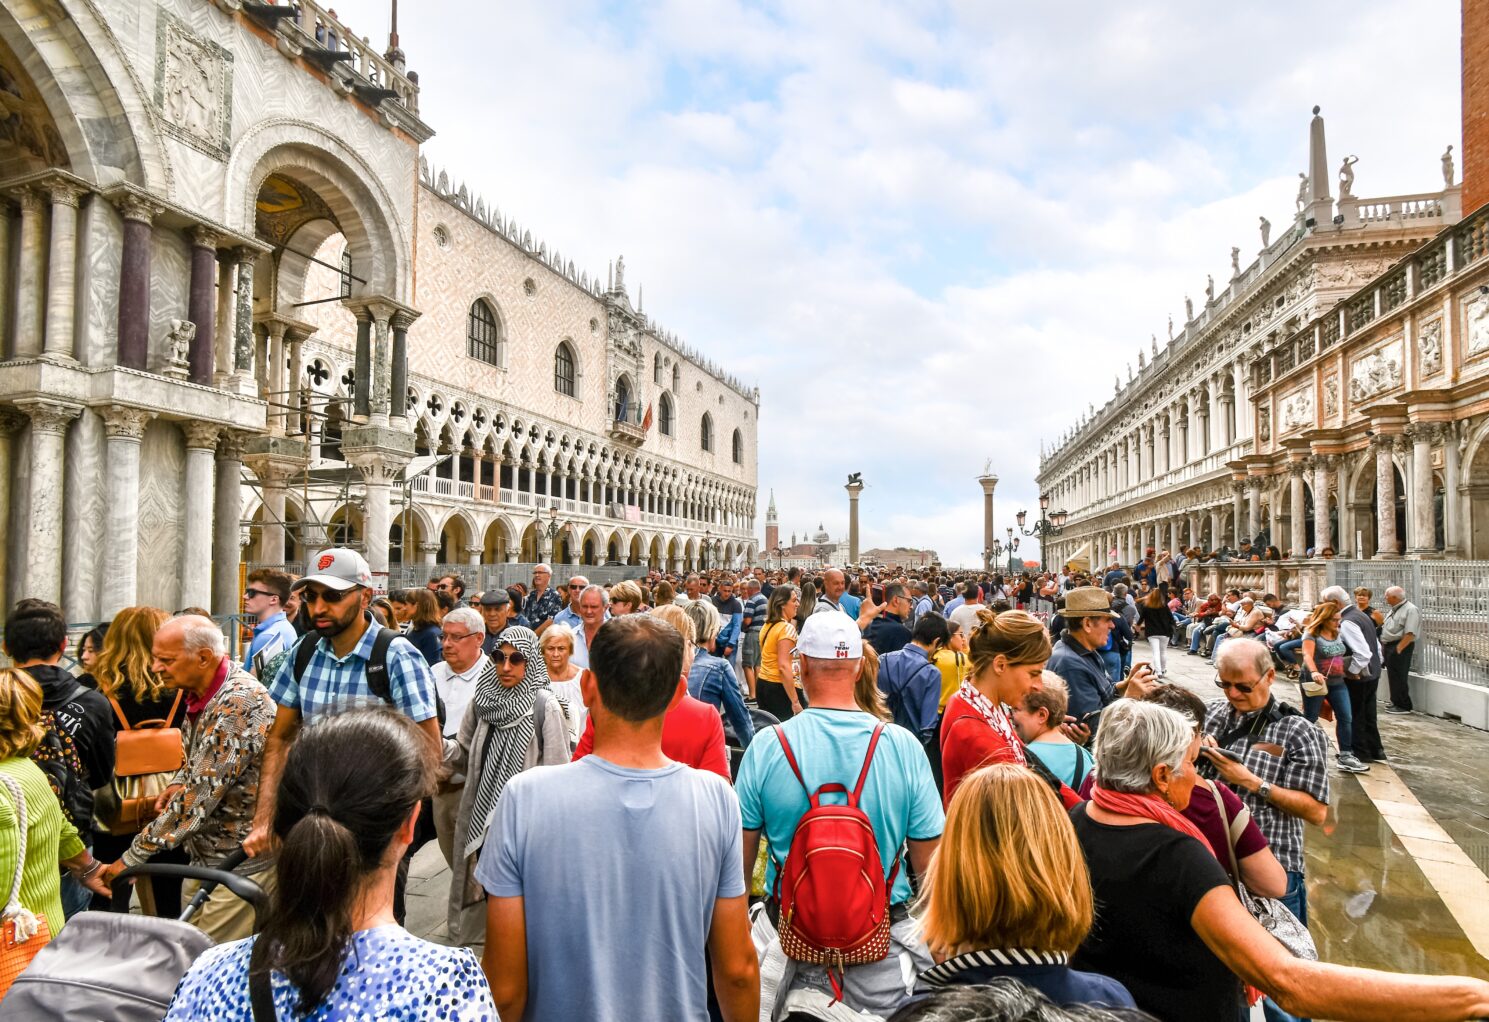 Overtourism is an issue that plagues places like Venice